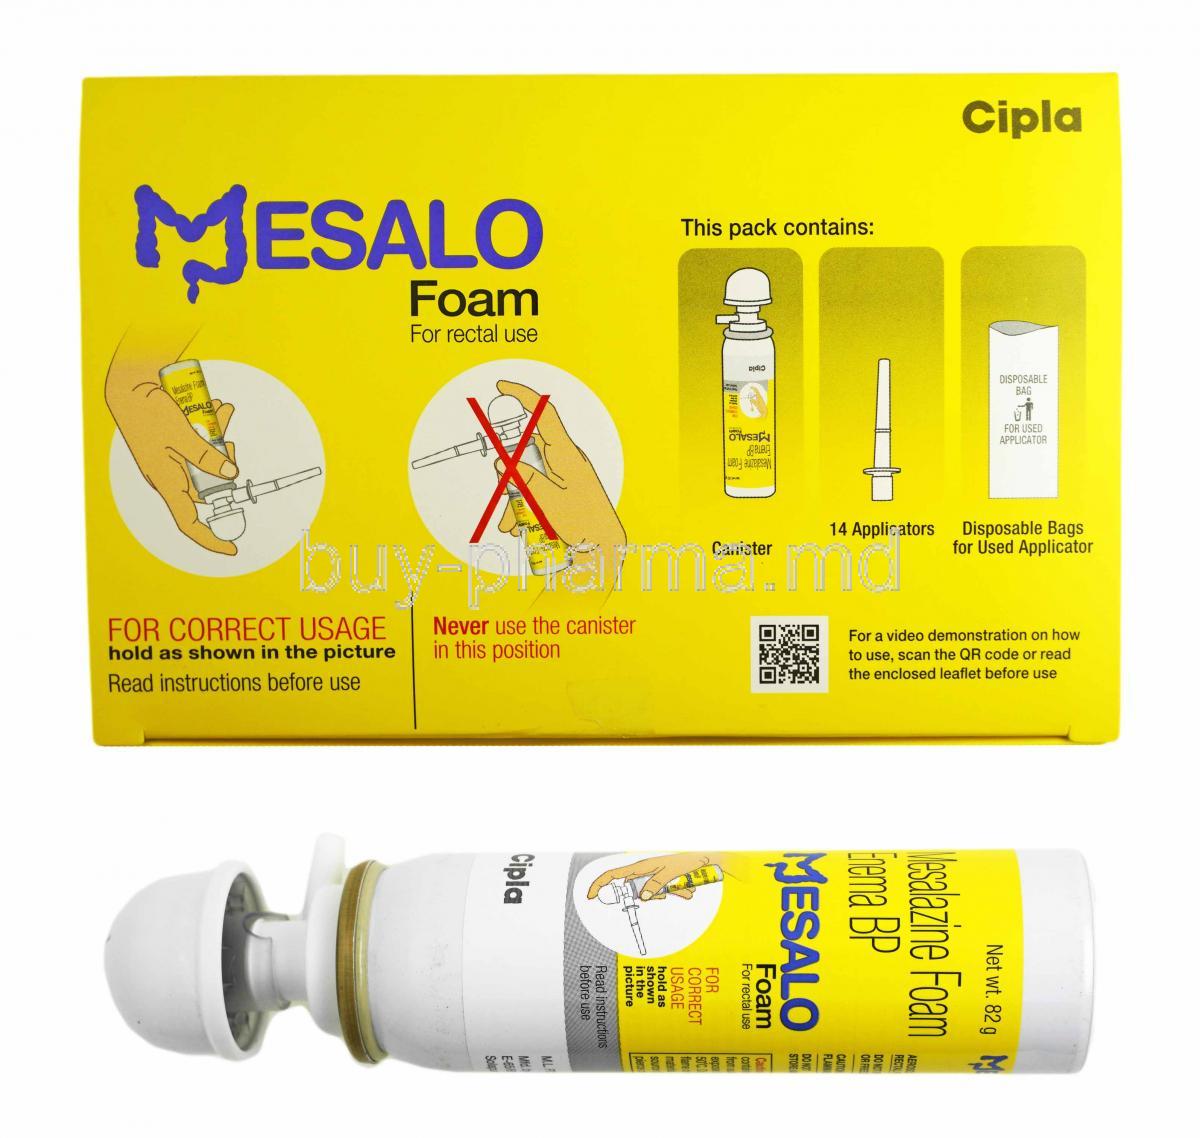 Mesalo Foam For rectal use, Mesalazine box and bottle